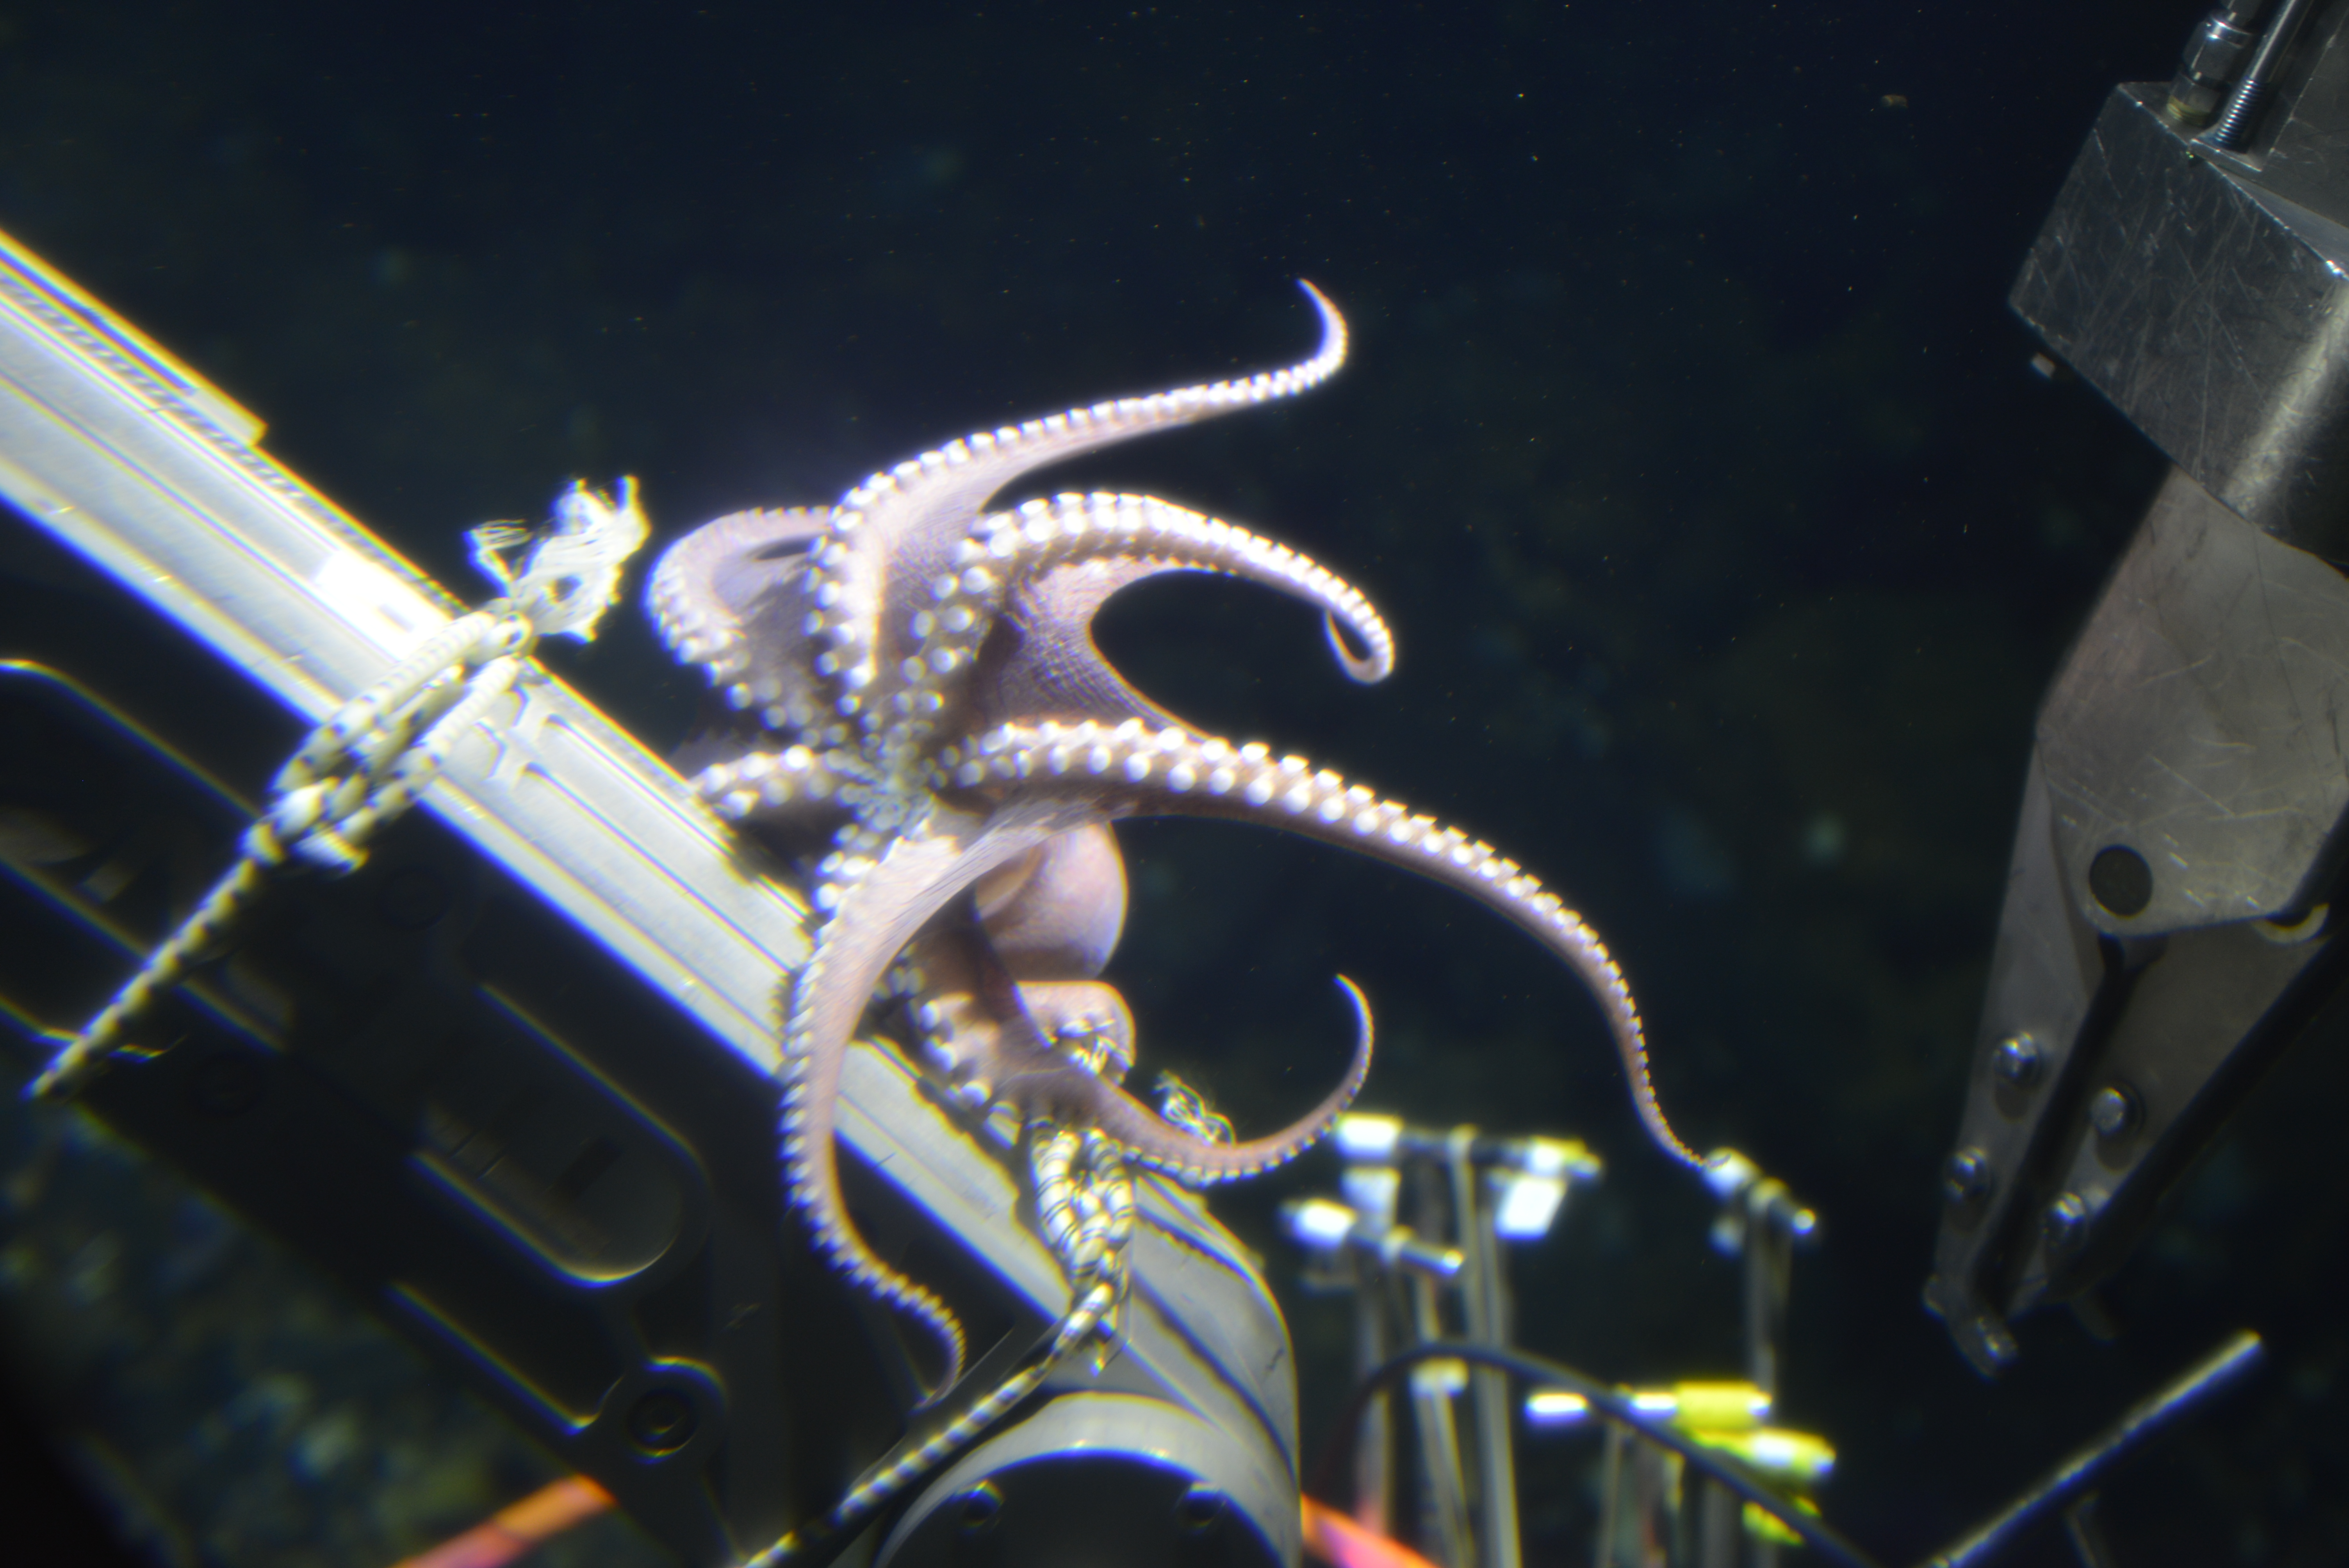 An octopus wraps its arms around the arm of a submersible studying sea vents.